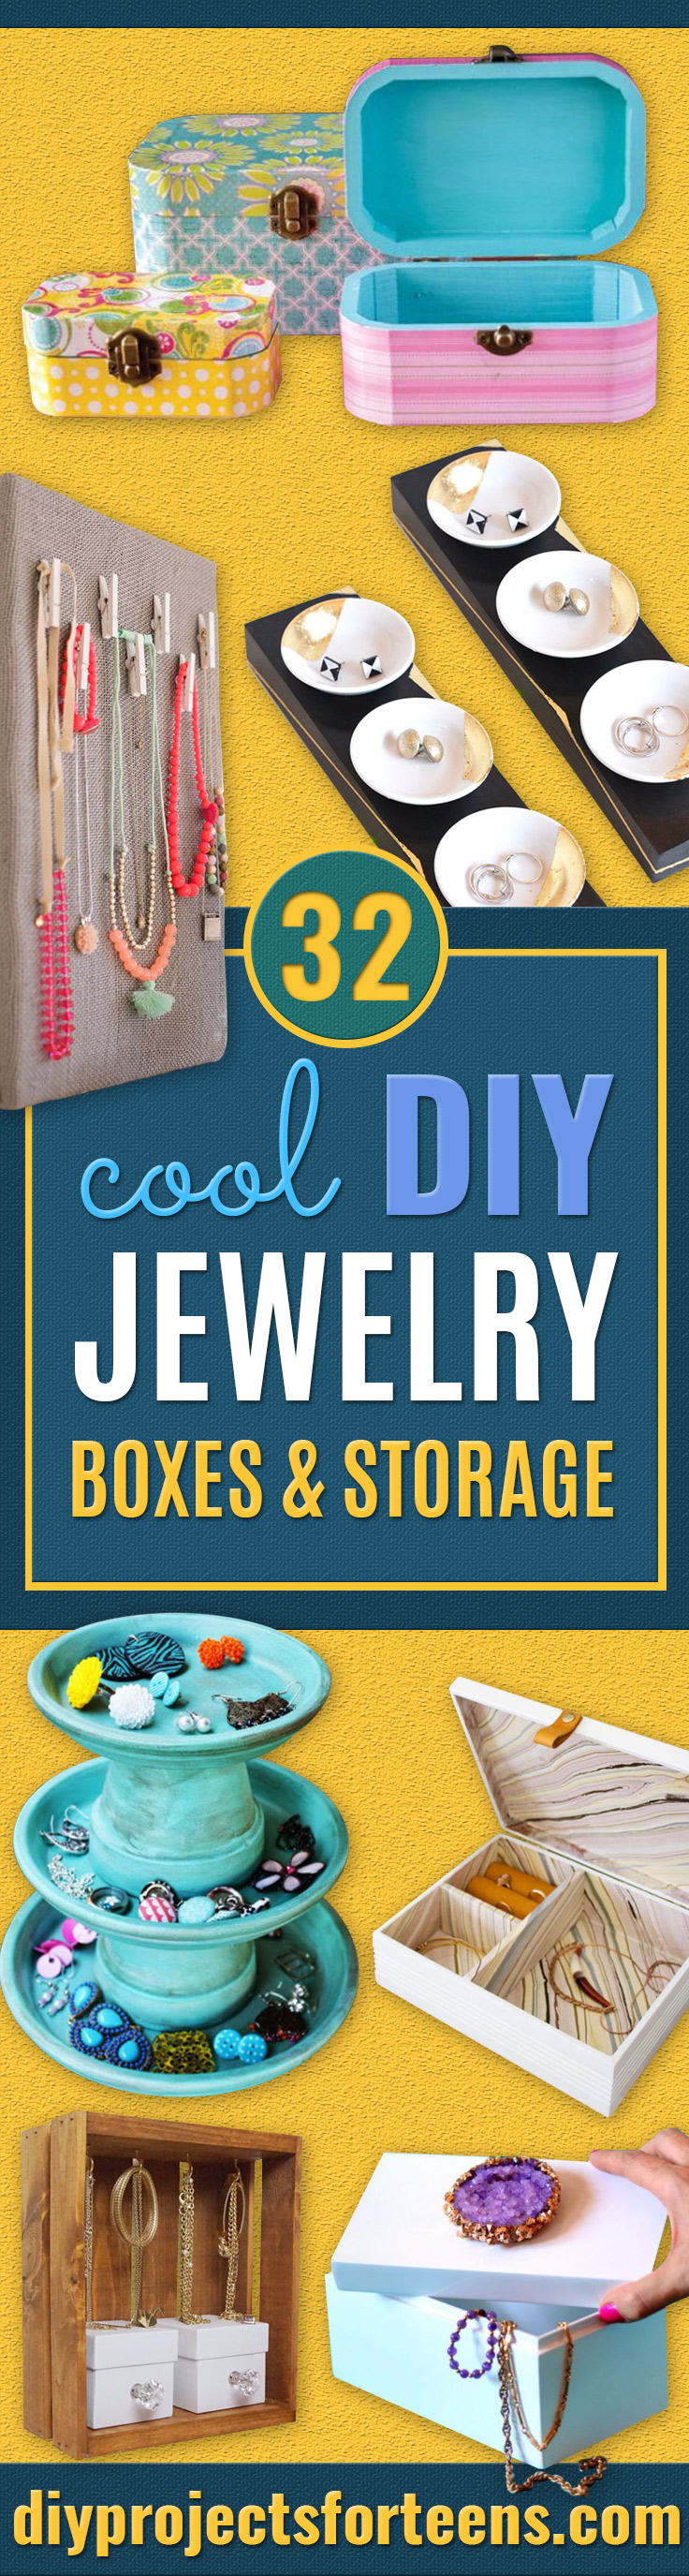 DIY Jewelry Storage - Do It Yourself Crafts and Projects for Organizing, Storing and Displaying Jewelry - Earrings, Rings, Necklaces - Jewelry Tree, Boxes, Hangers - Cheap and Easy Ways To Organize Jewelry in Bedroom and Bathroom - Dollar Store Crafts and Cheap Ideas for Decorating http://diyprojectsforteens.com/diy-jewelry-storage